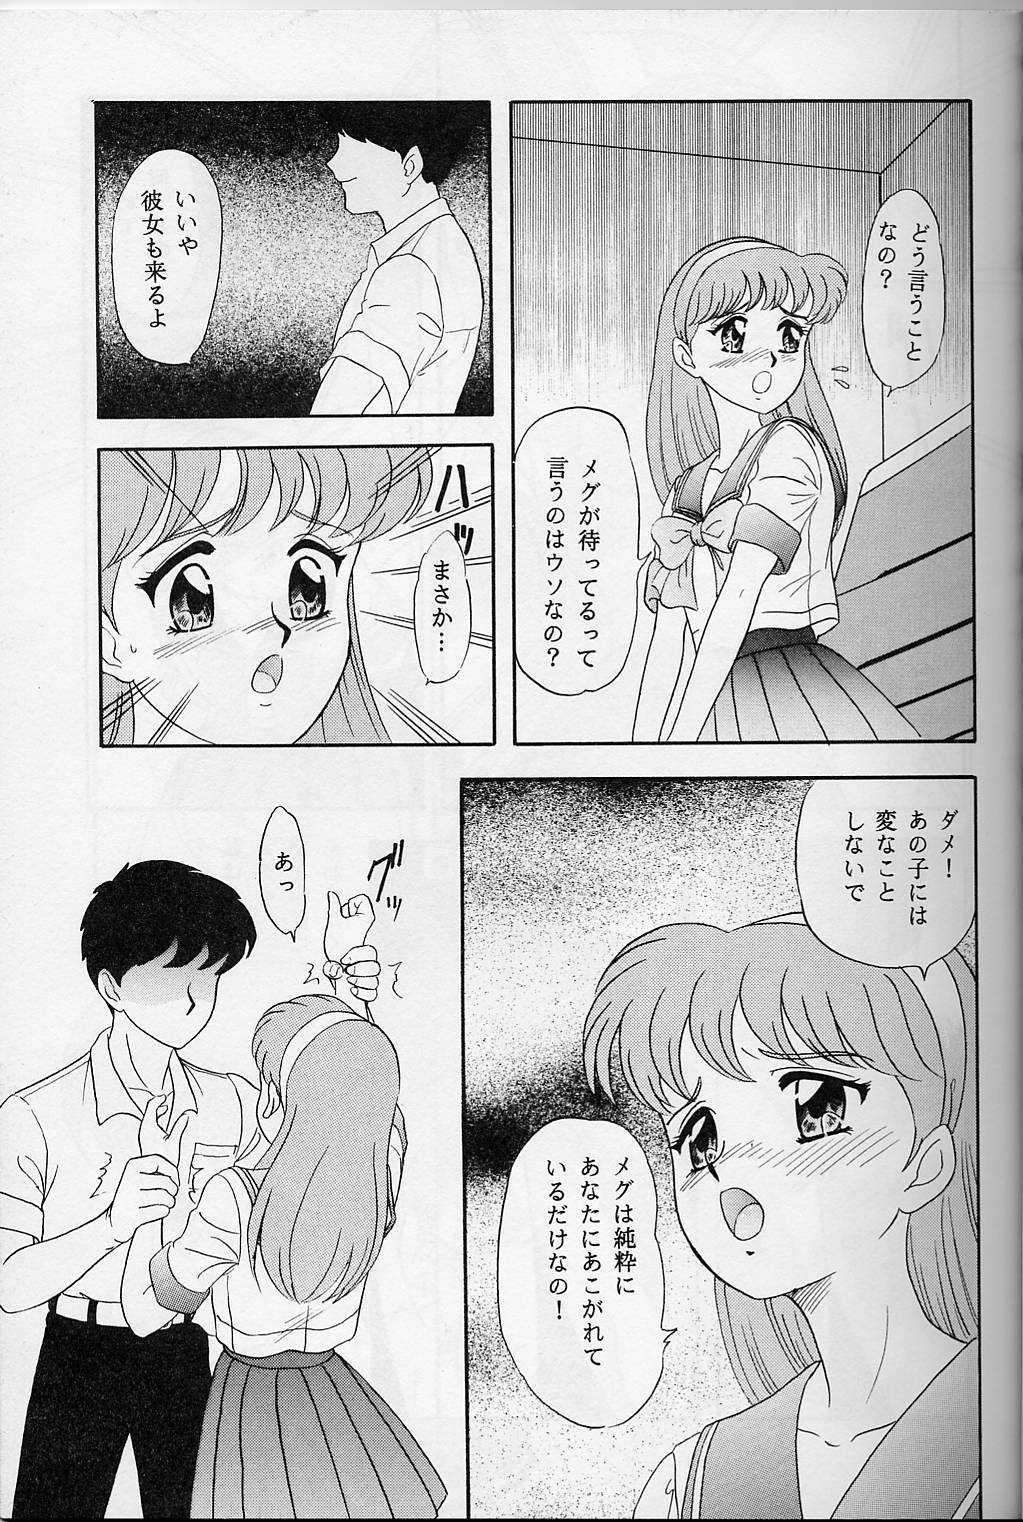 Ejaculation Lunch Time 5 - Tokimeki memorial Big Booty - Page 6